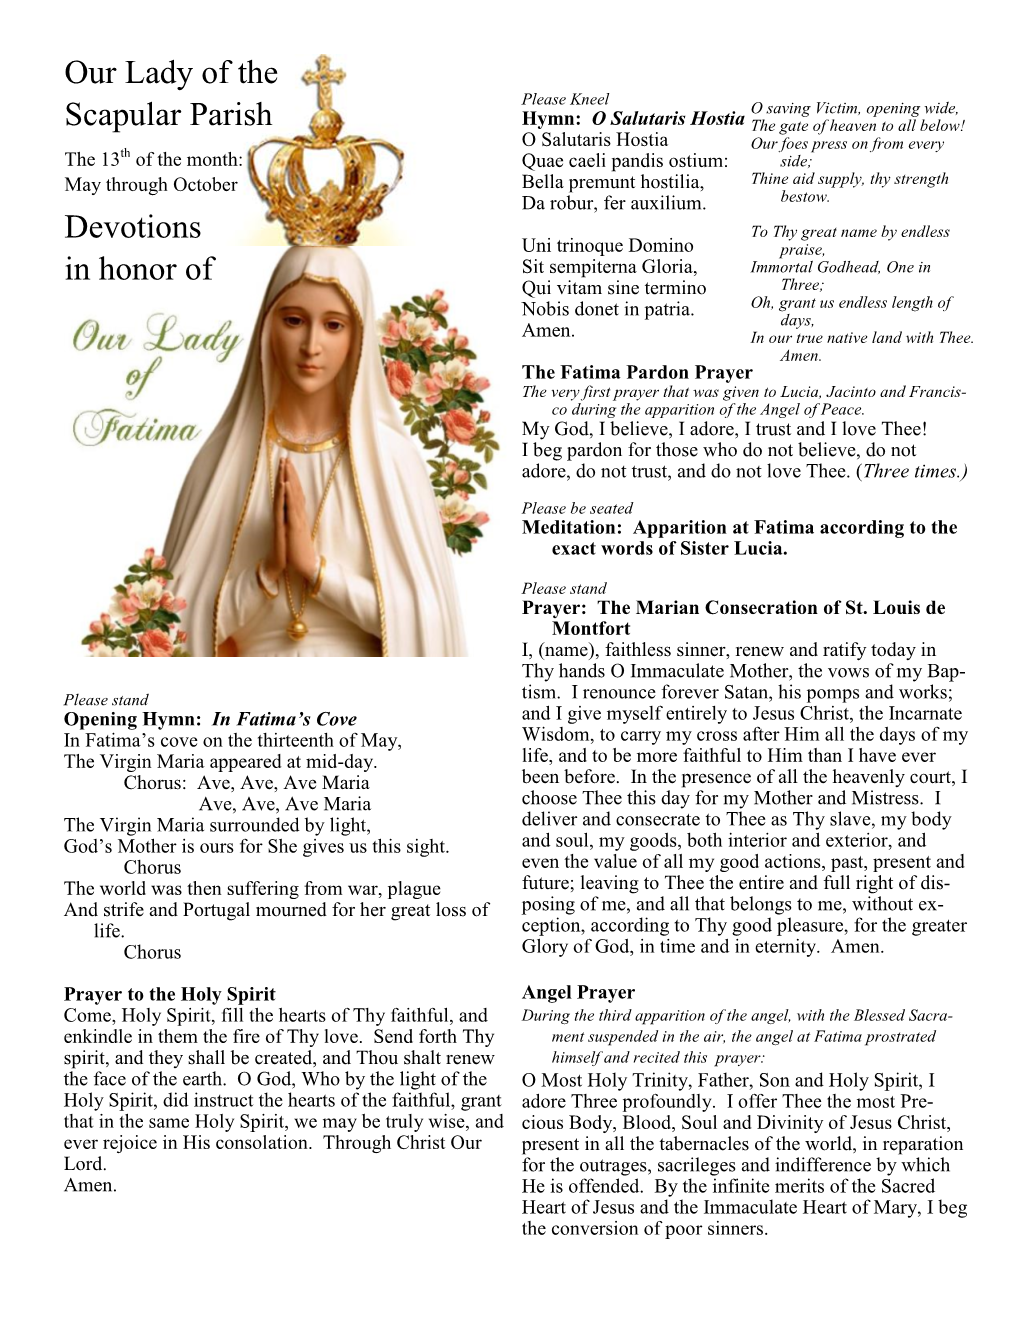 Our Lady of the Scapular Parish Devotions in Honor Of